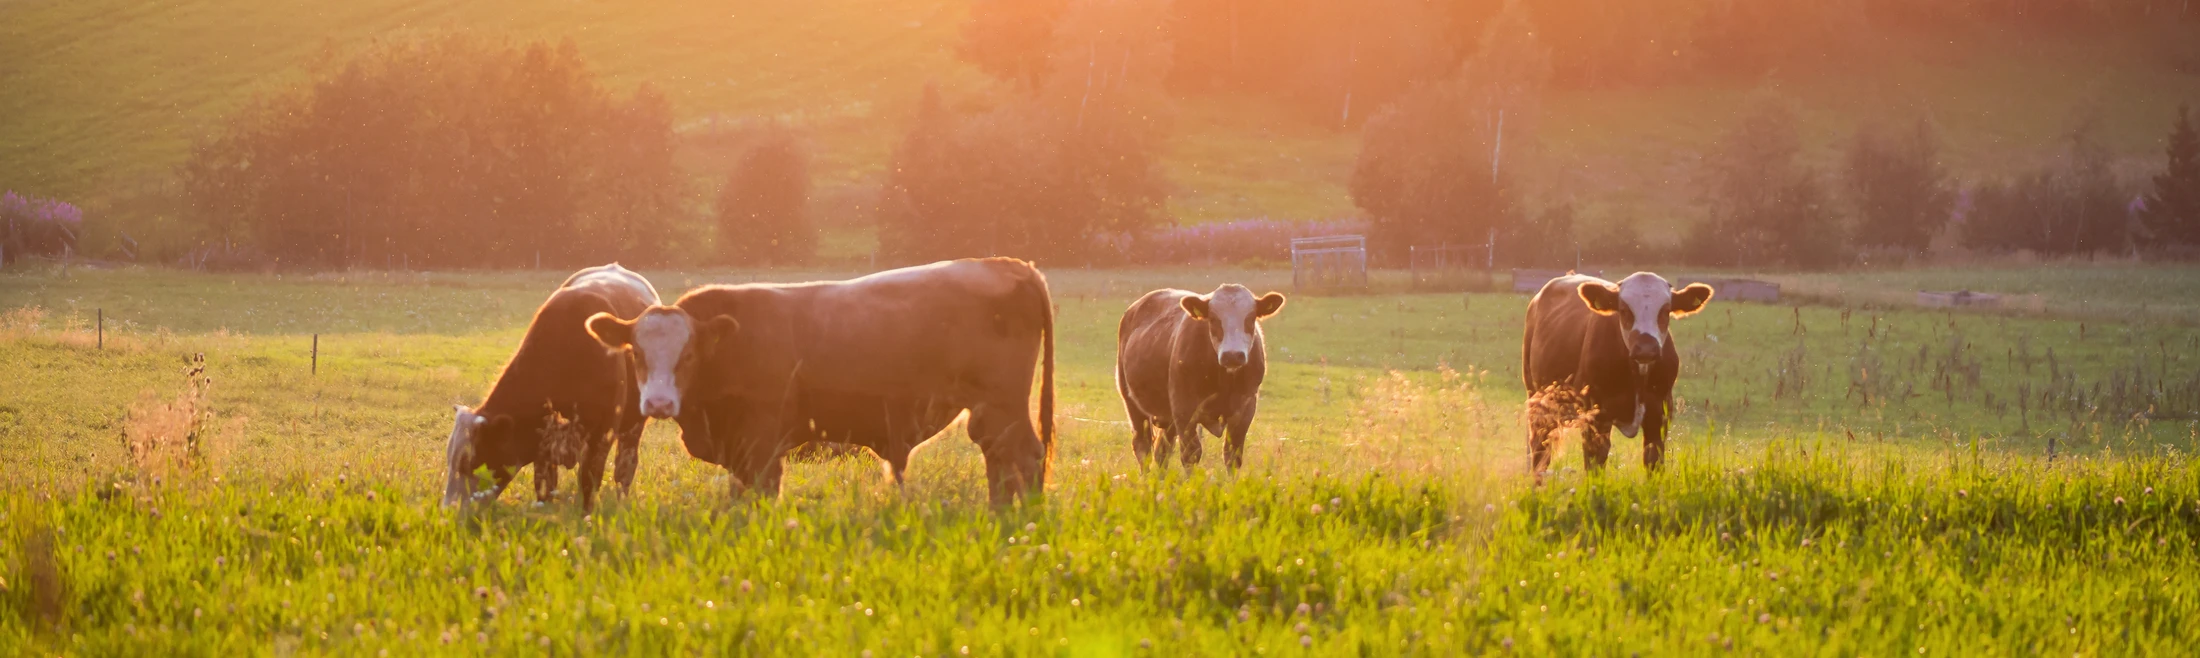 A group of cows grazing in a field at sunset.